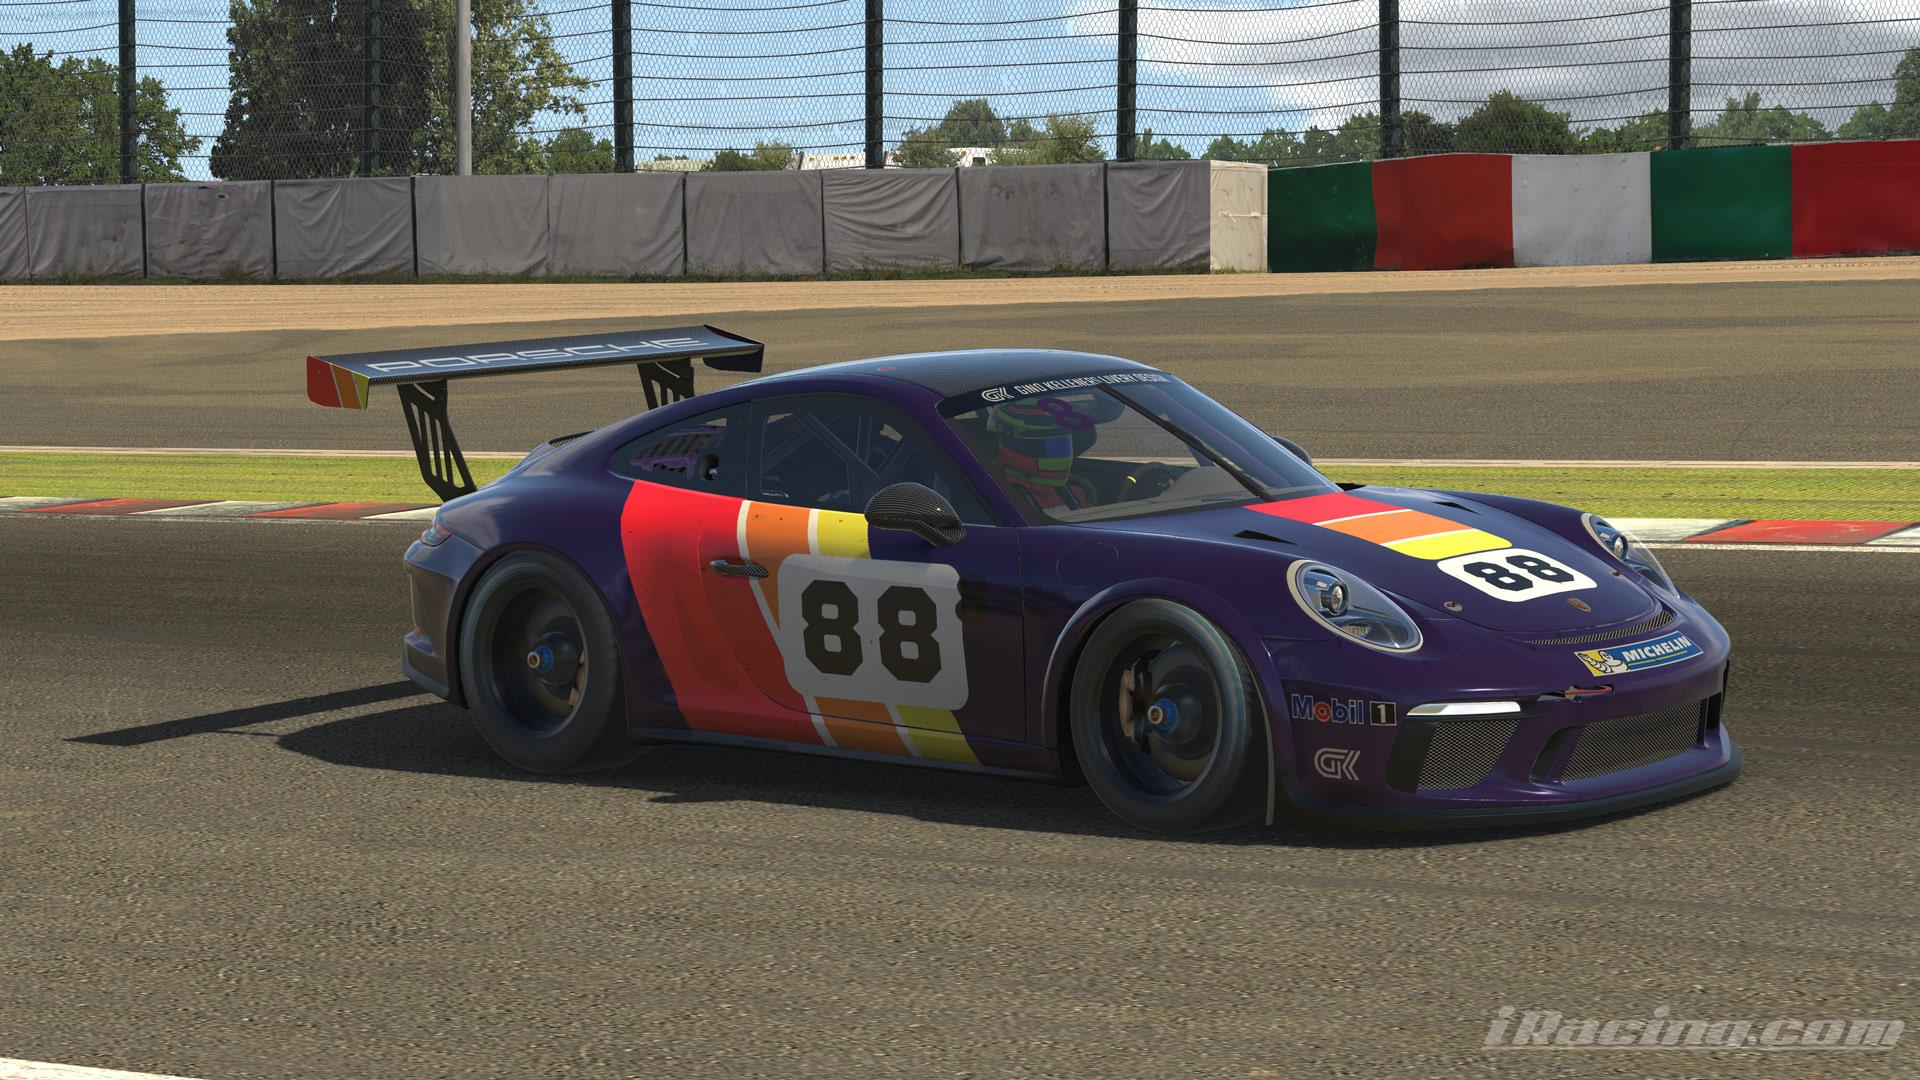 Preview of Purple Rain Livery - Porsche 911 GT3 Cup  by Gino Kelleners